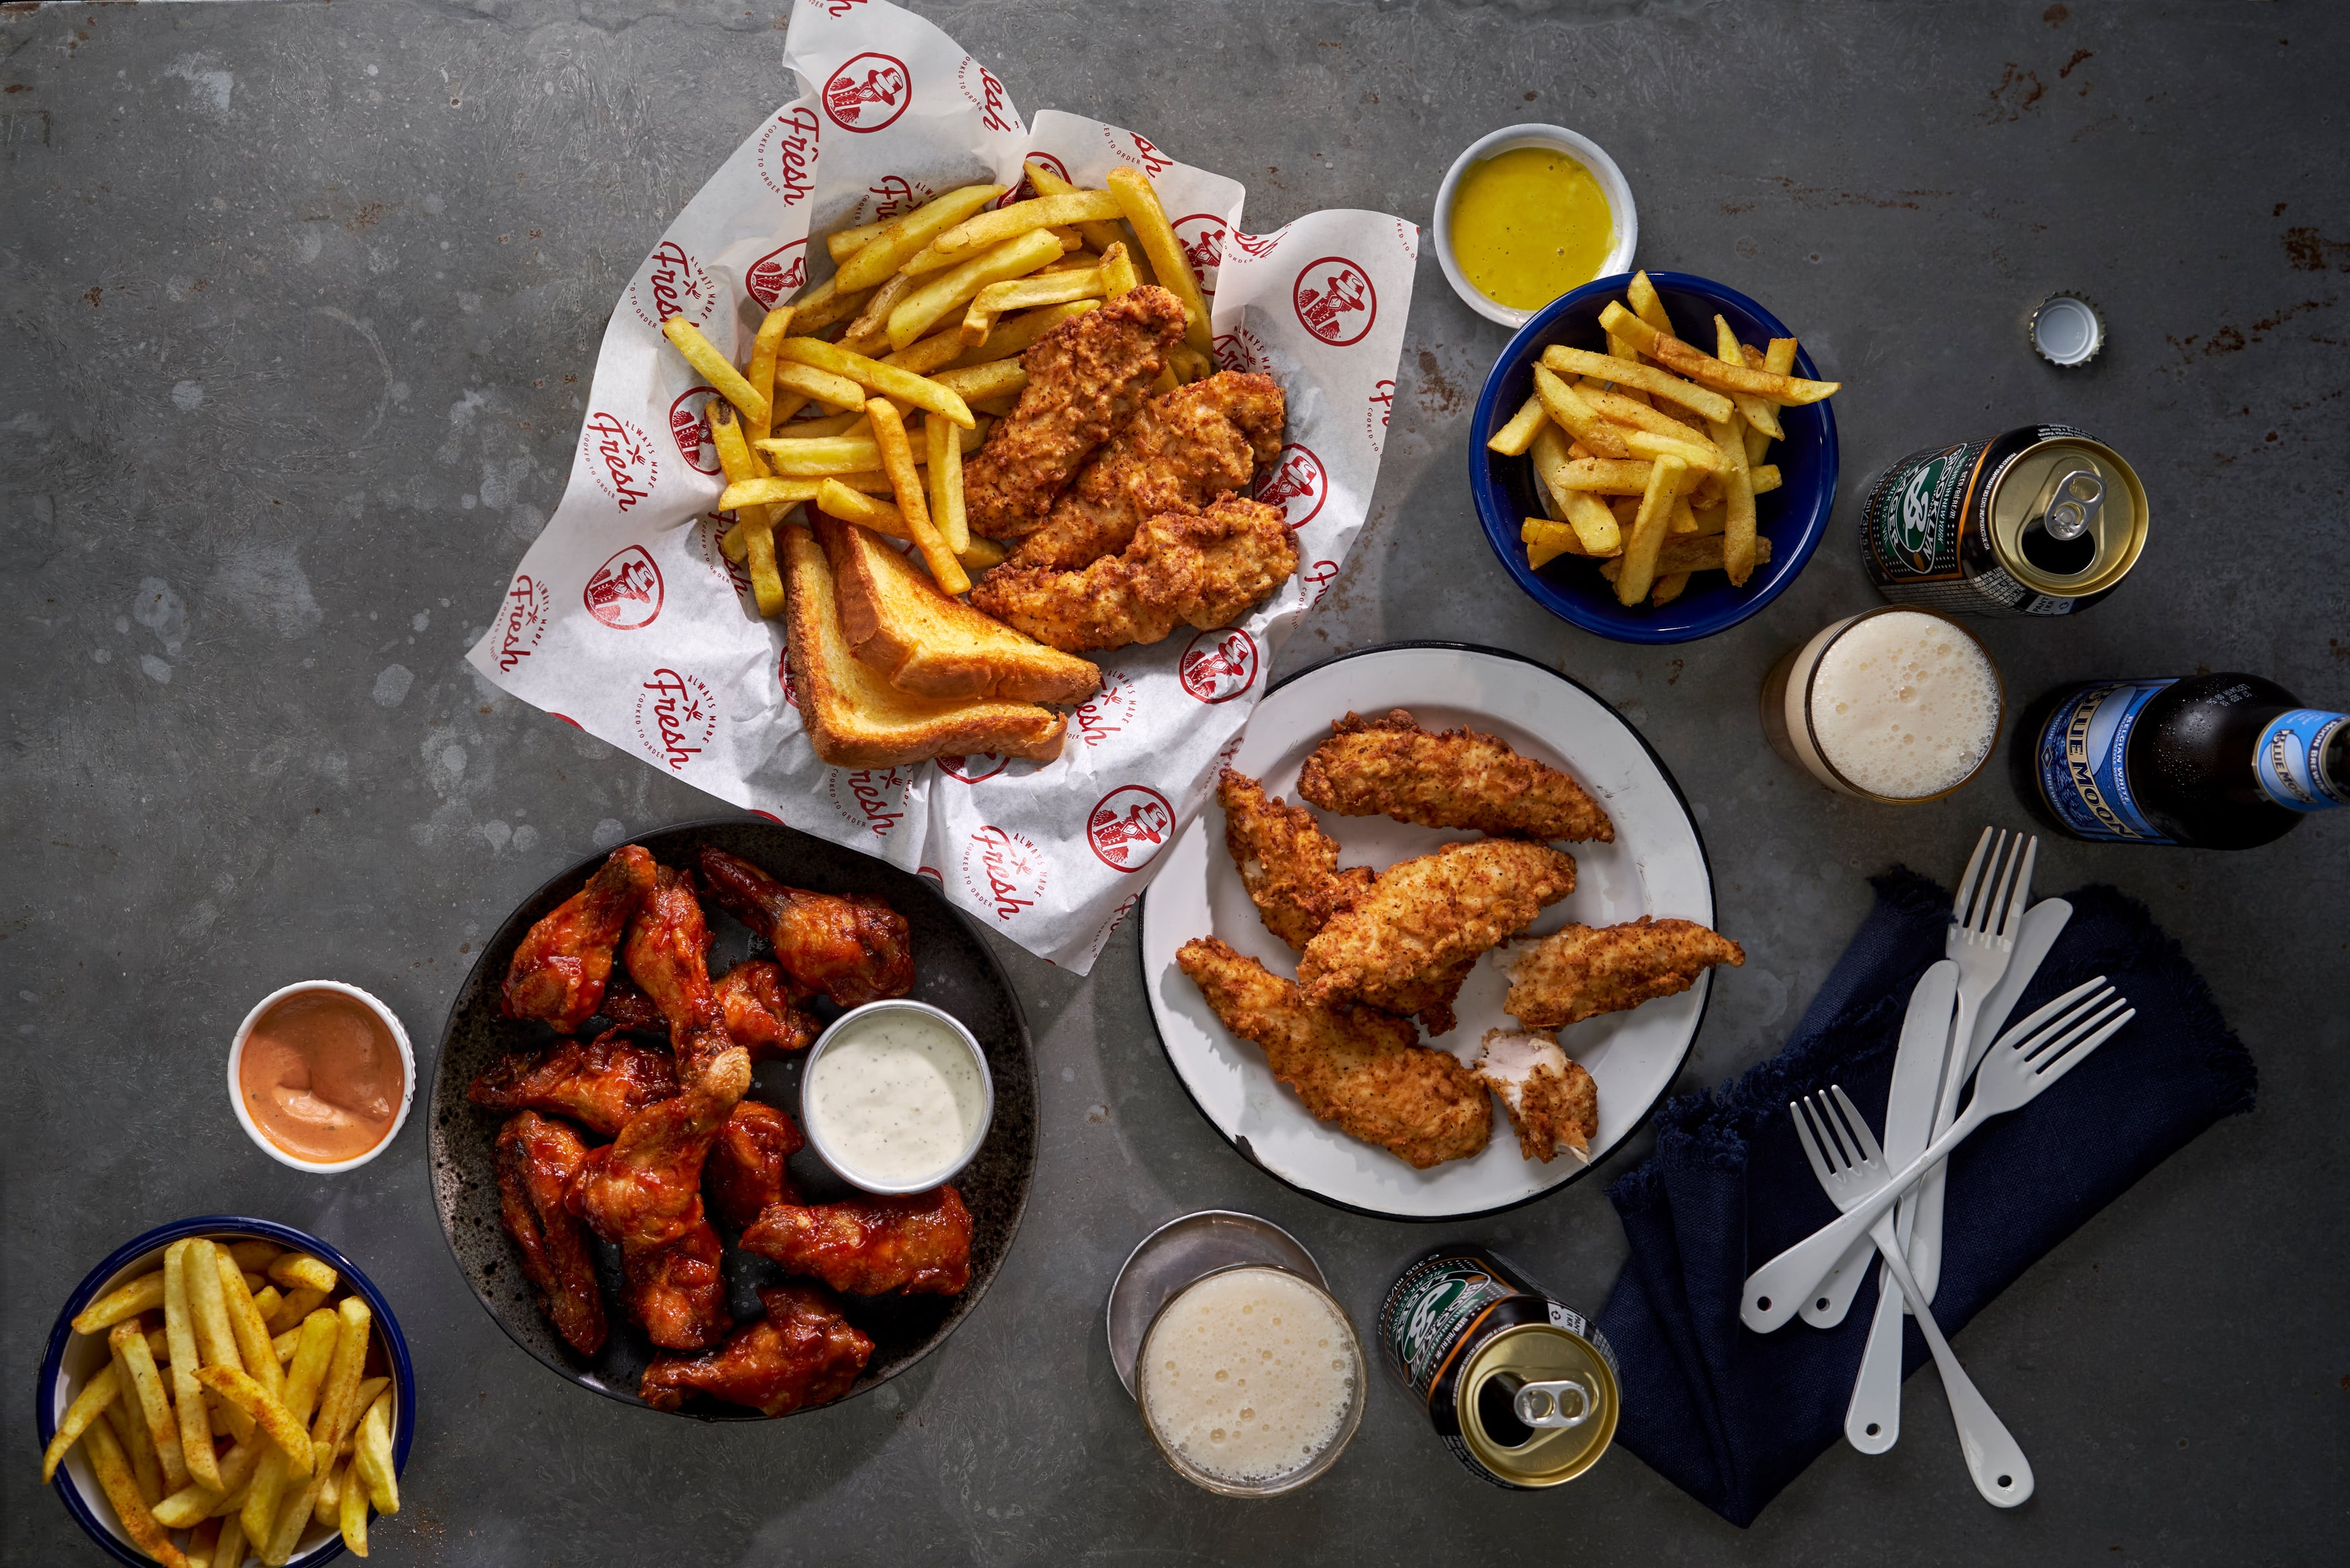 Slim Chickens to Open in Manchester's Trafford Centre - About Manchester